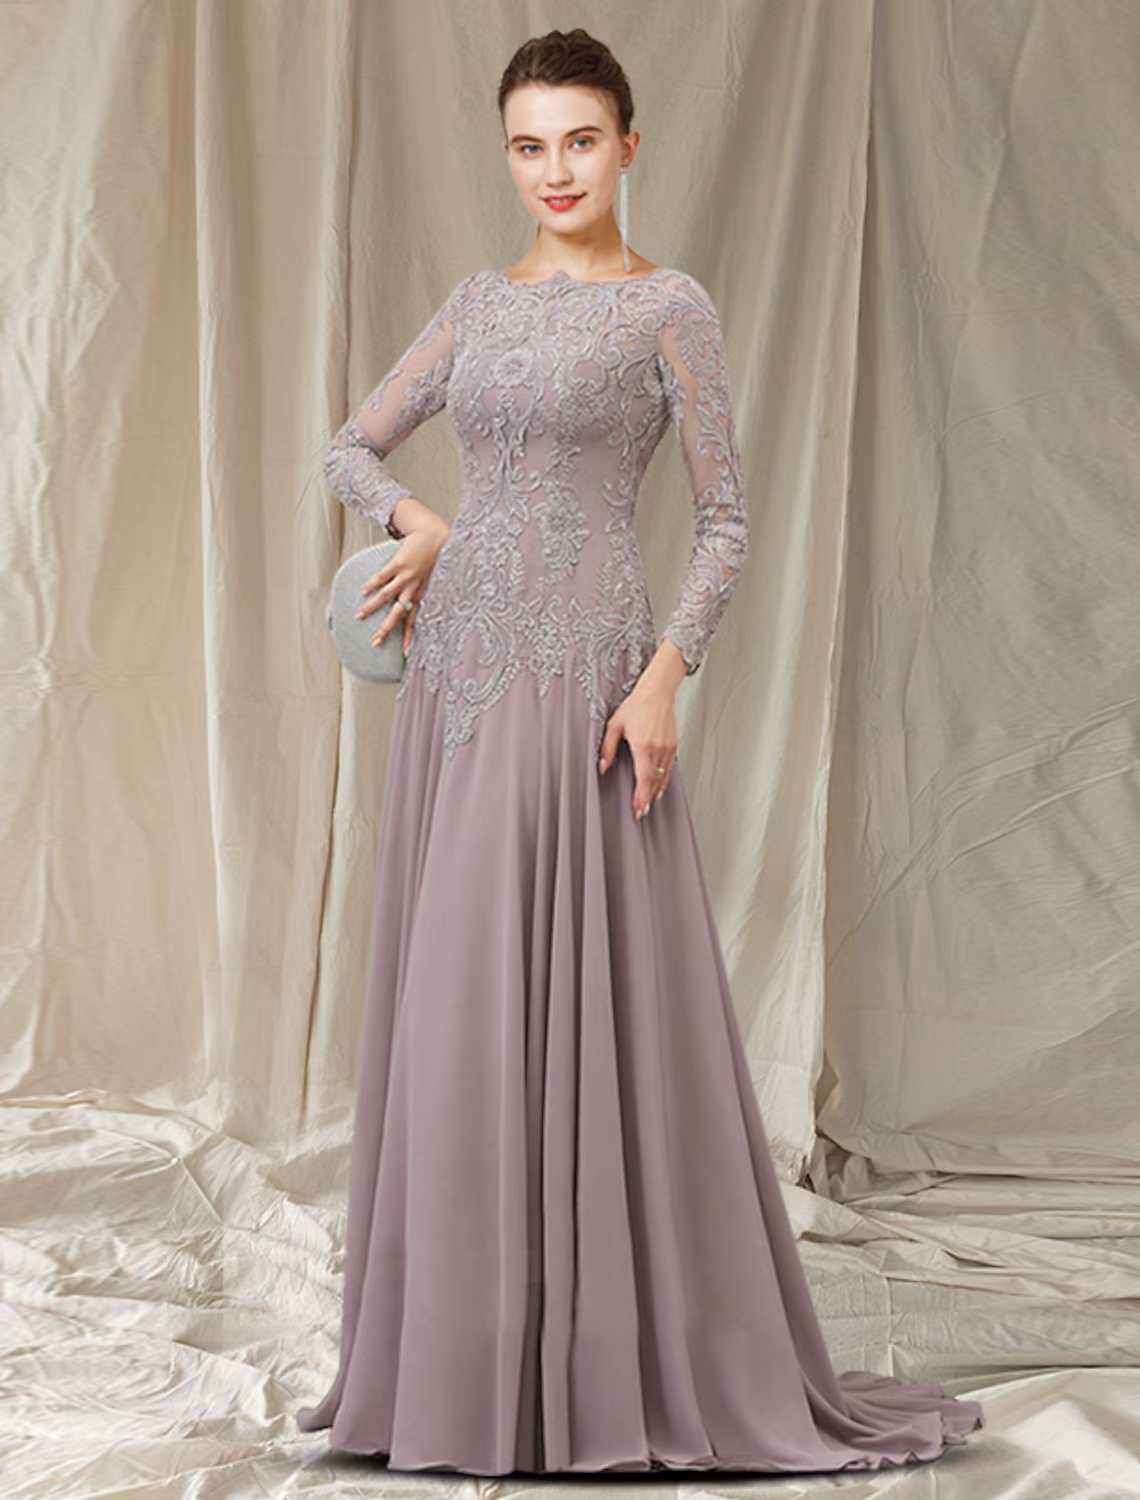 A-Line Mother of the Bride Dress Elegant Chiffon Lace Long Sleeve with Pleats Appliques